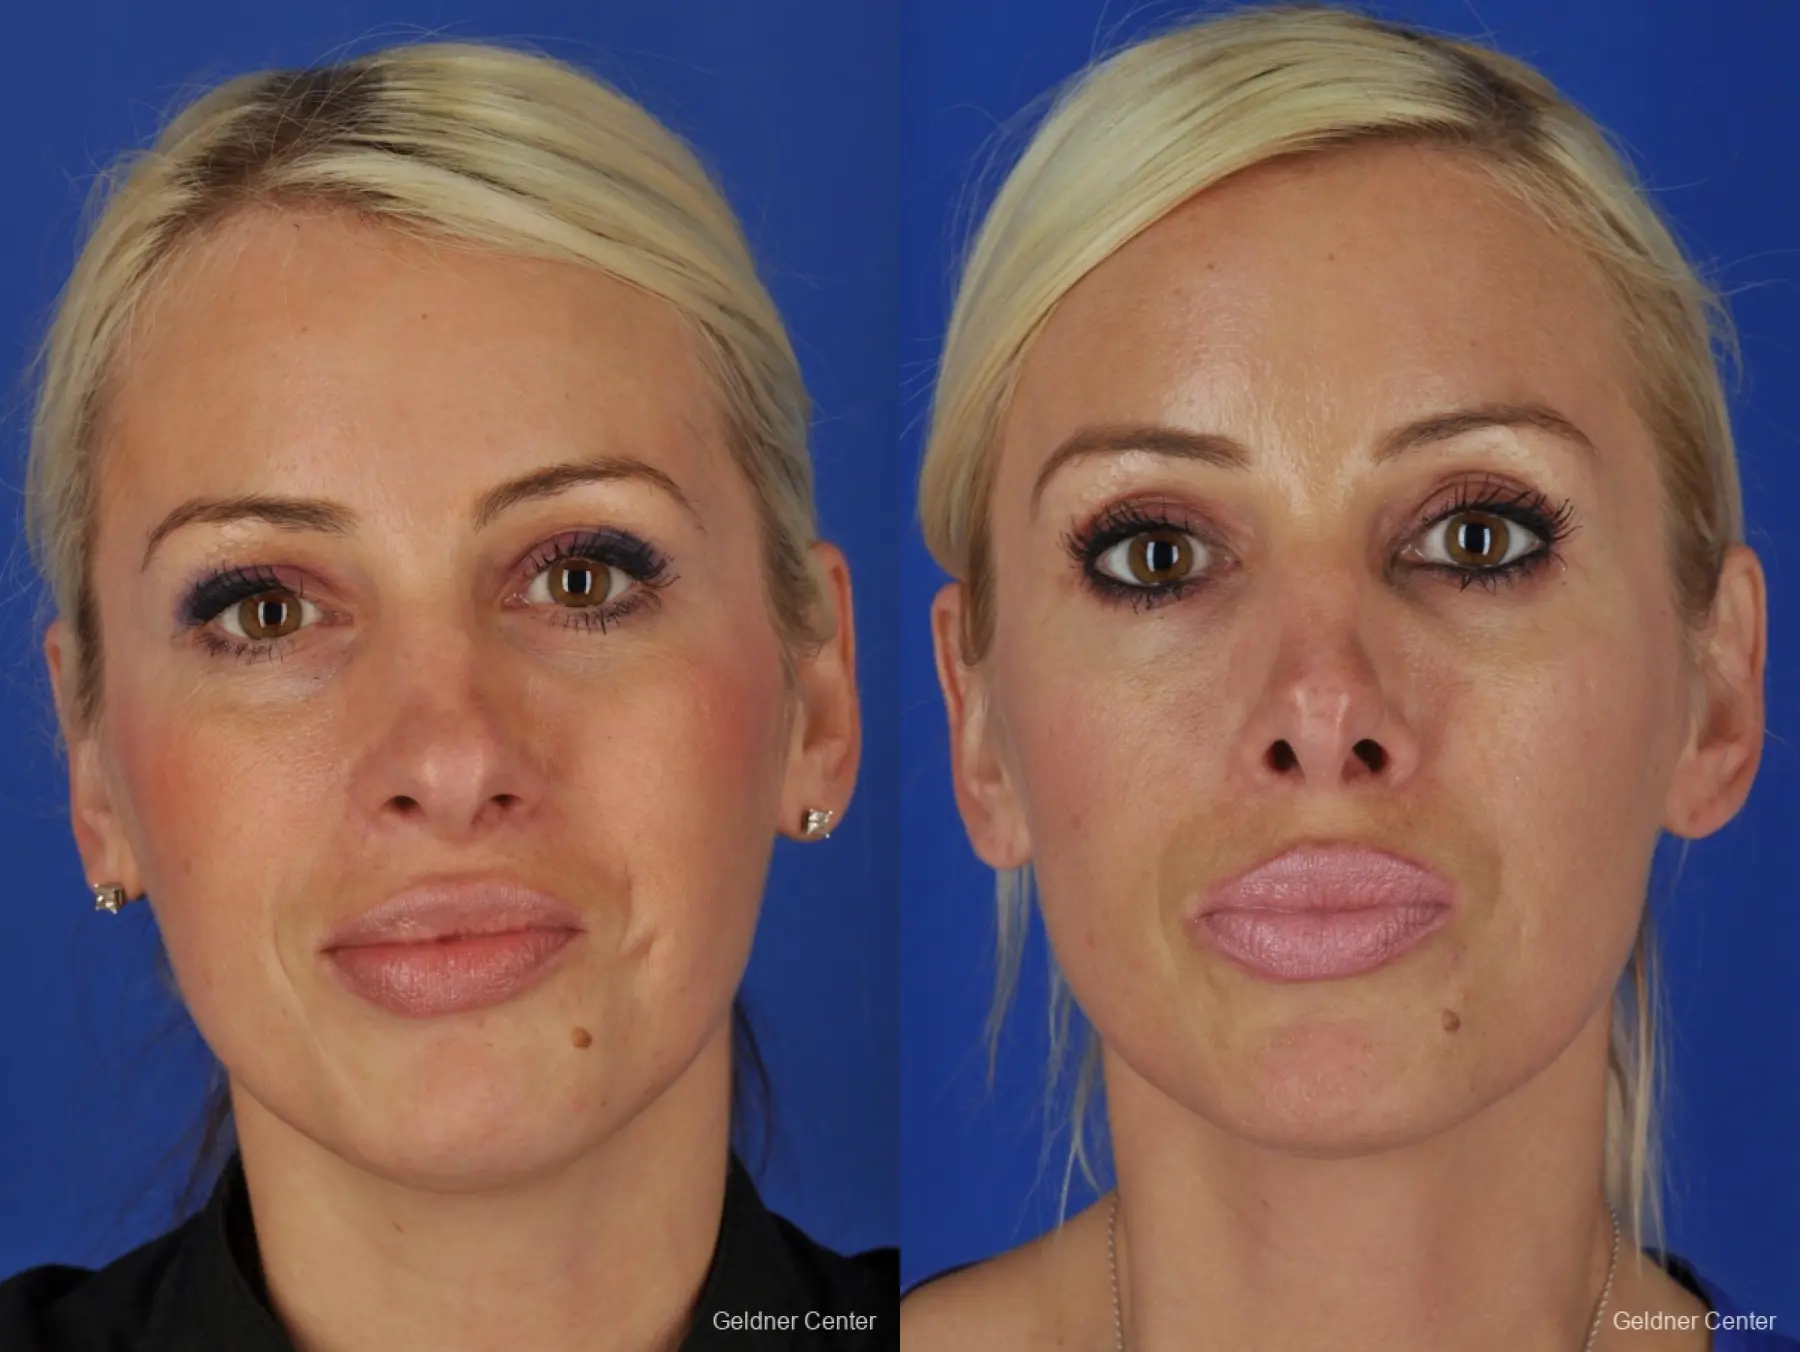 Chicago Rhinoplasty - Before and After